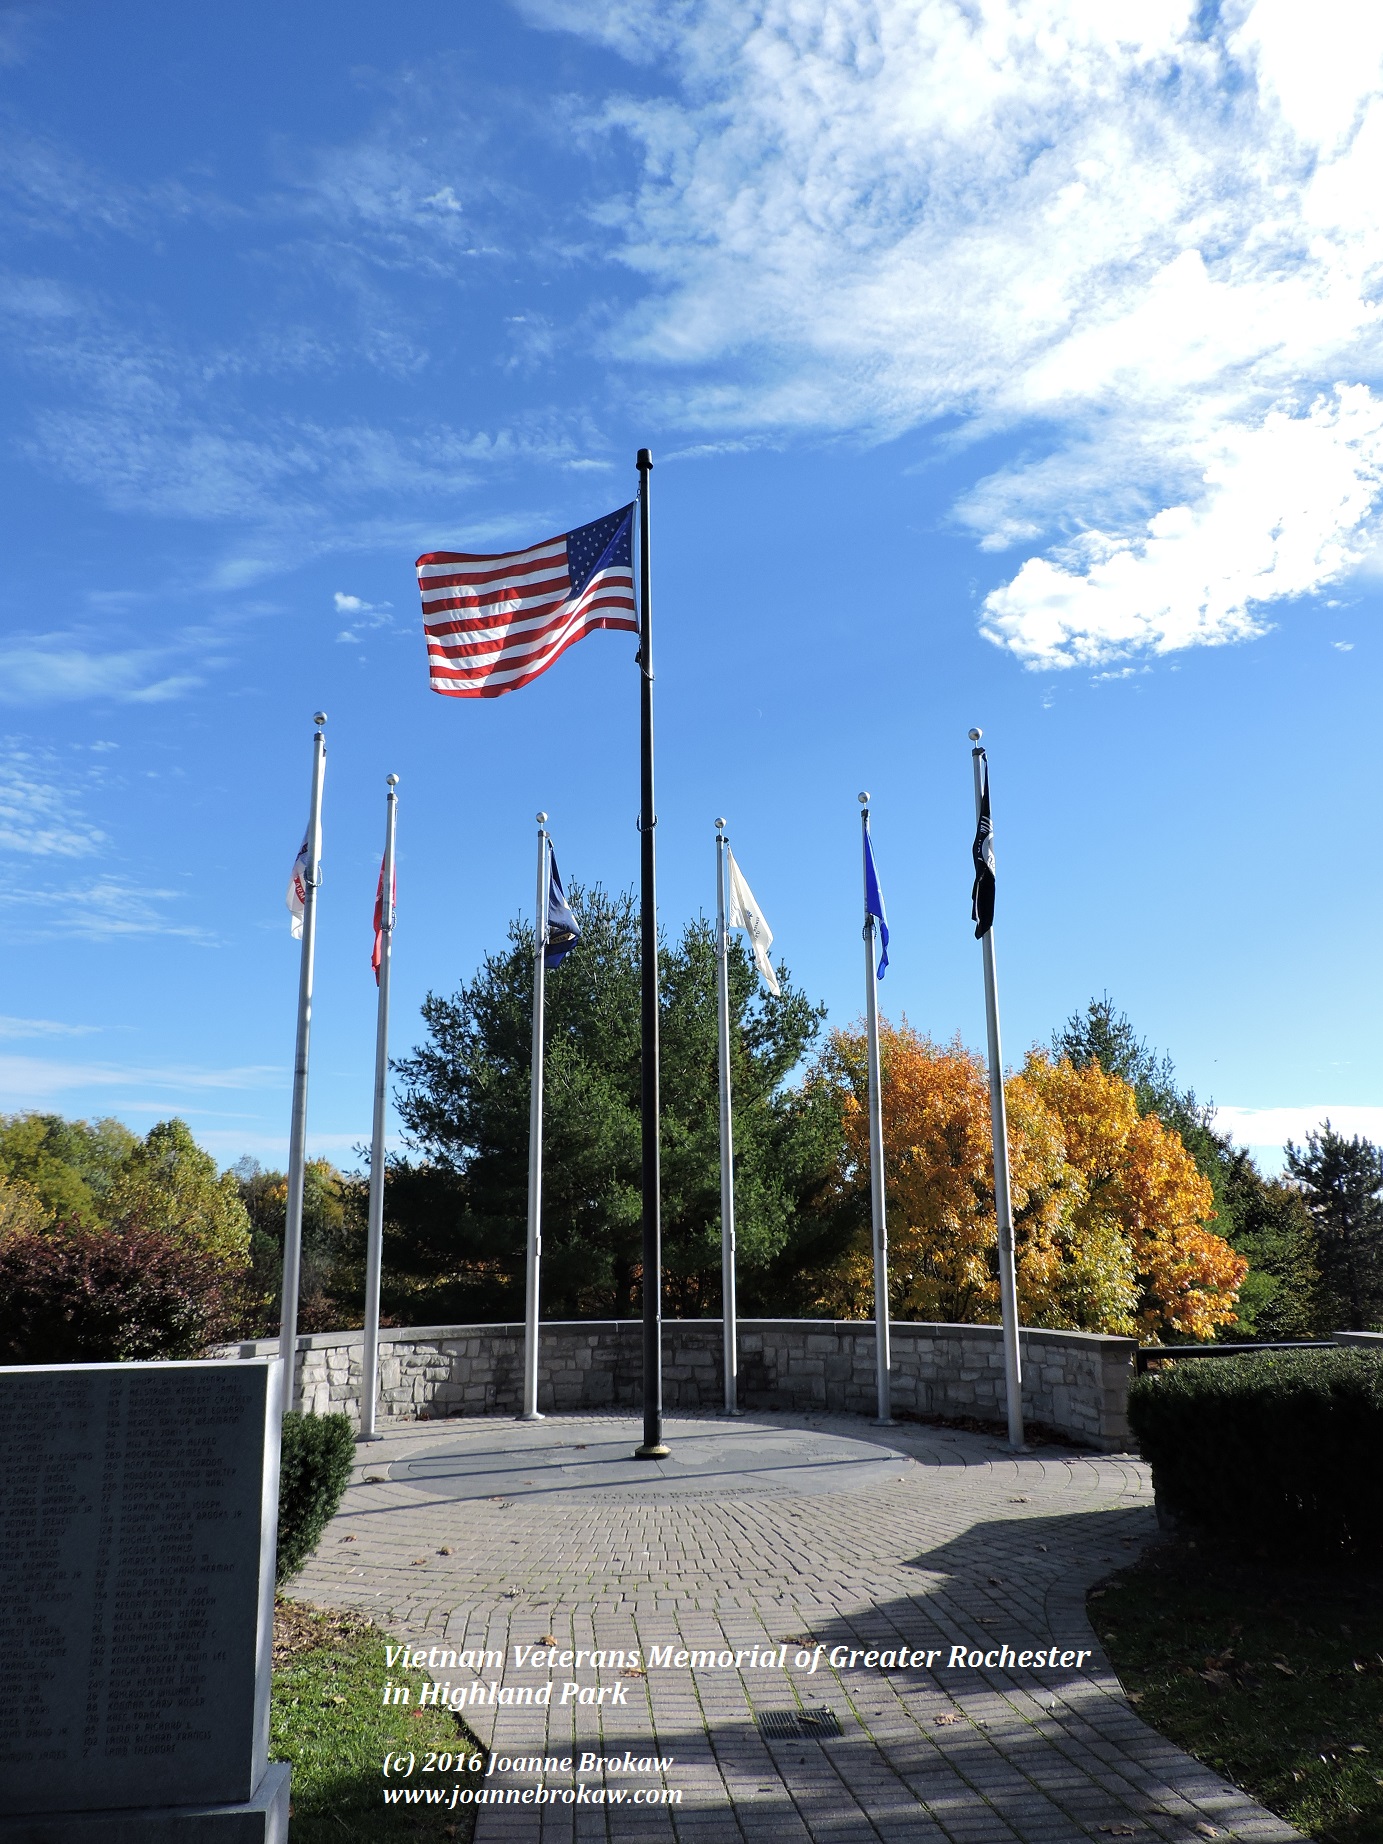 The flags at the Vietnam Veterans Memorial in Highland Park, Rochester, NY.